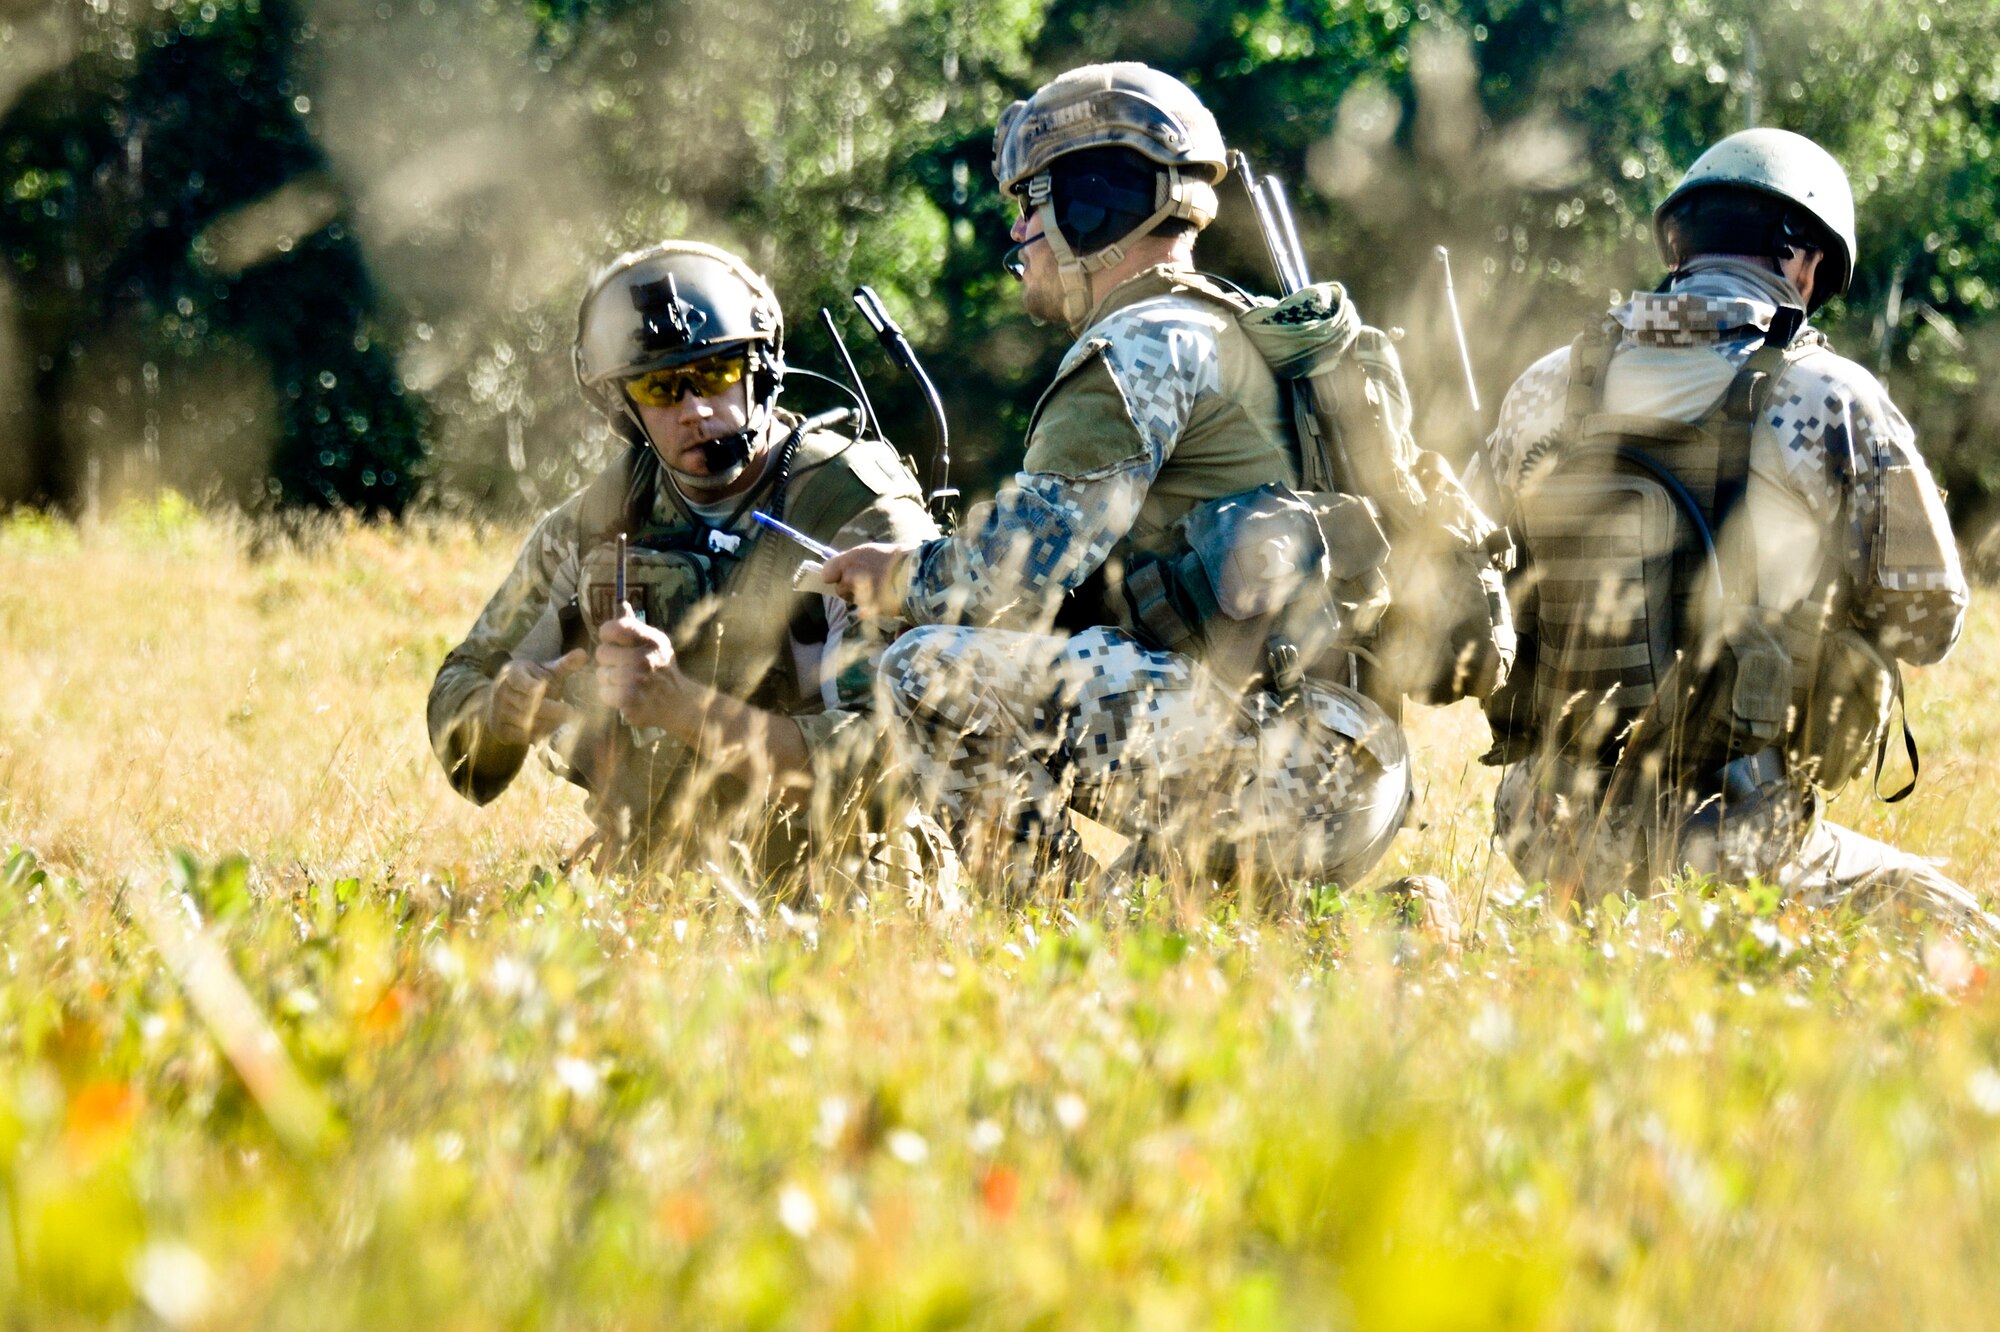 Master Sgt. John M. Oliver, (from left) Tactical Air Control Party specialist with the 169th Air Support Operations Squadron, Latvian 1st Sgt. Modris Circenis and Cpl. Janis Gabranis, TACPs with the Latvian National Armed Forces, make a plan to advance on an enemy position during a reconnaissance mission at Operation Northern Strike in Grayling Air Gunnery Range, Grayling, Mich., Aug. 14, 2014. (U.S. Air National Guard photo by Staff Sgt. Lealan Buehrer)